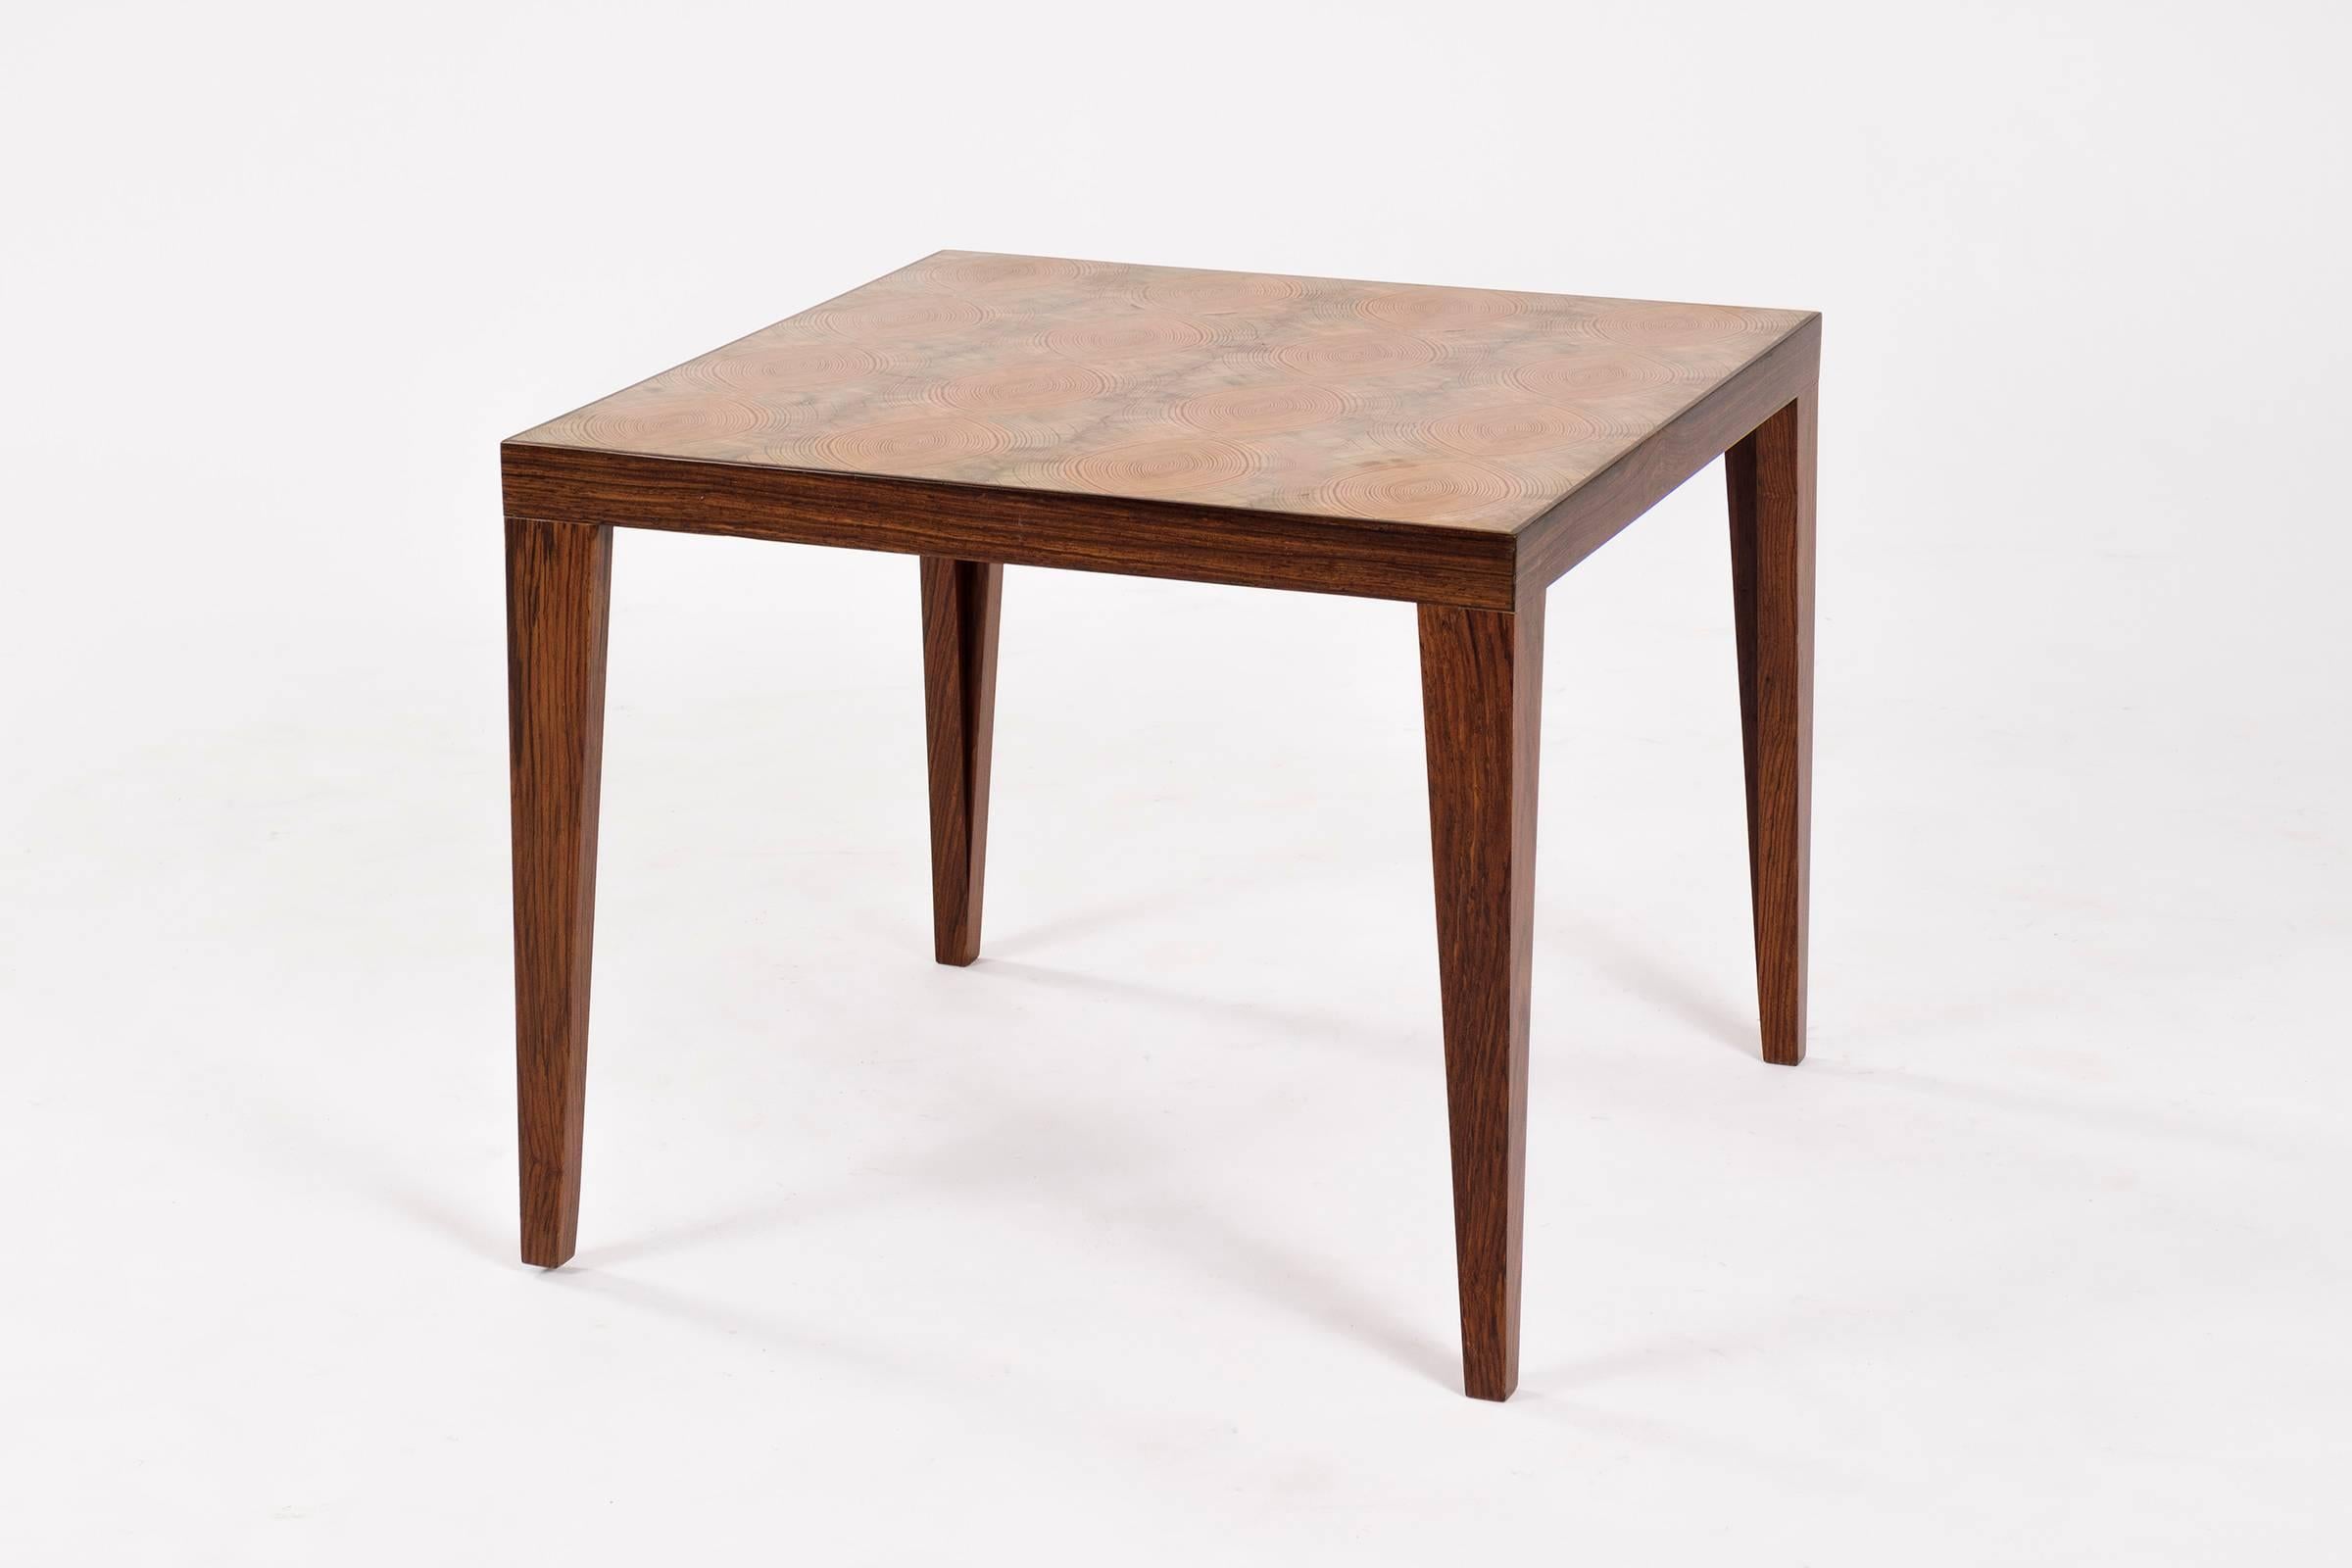 Unique side table- rosewood legs, bookmatched  end grain veneer Douglas fir top by Uruguayan Craftsman Roberto Sorrondeguy.
1997 Neocon award winning designer for his tables.

This item is currently on view in our NYC Greenwich Street location